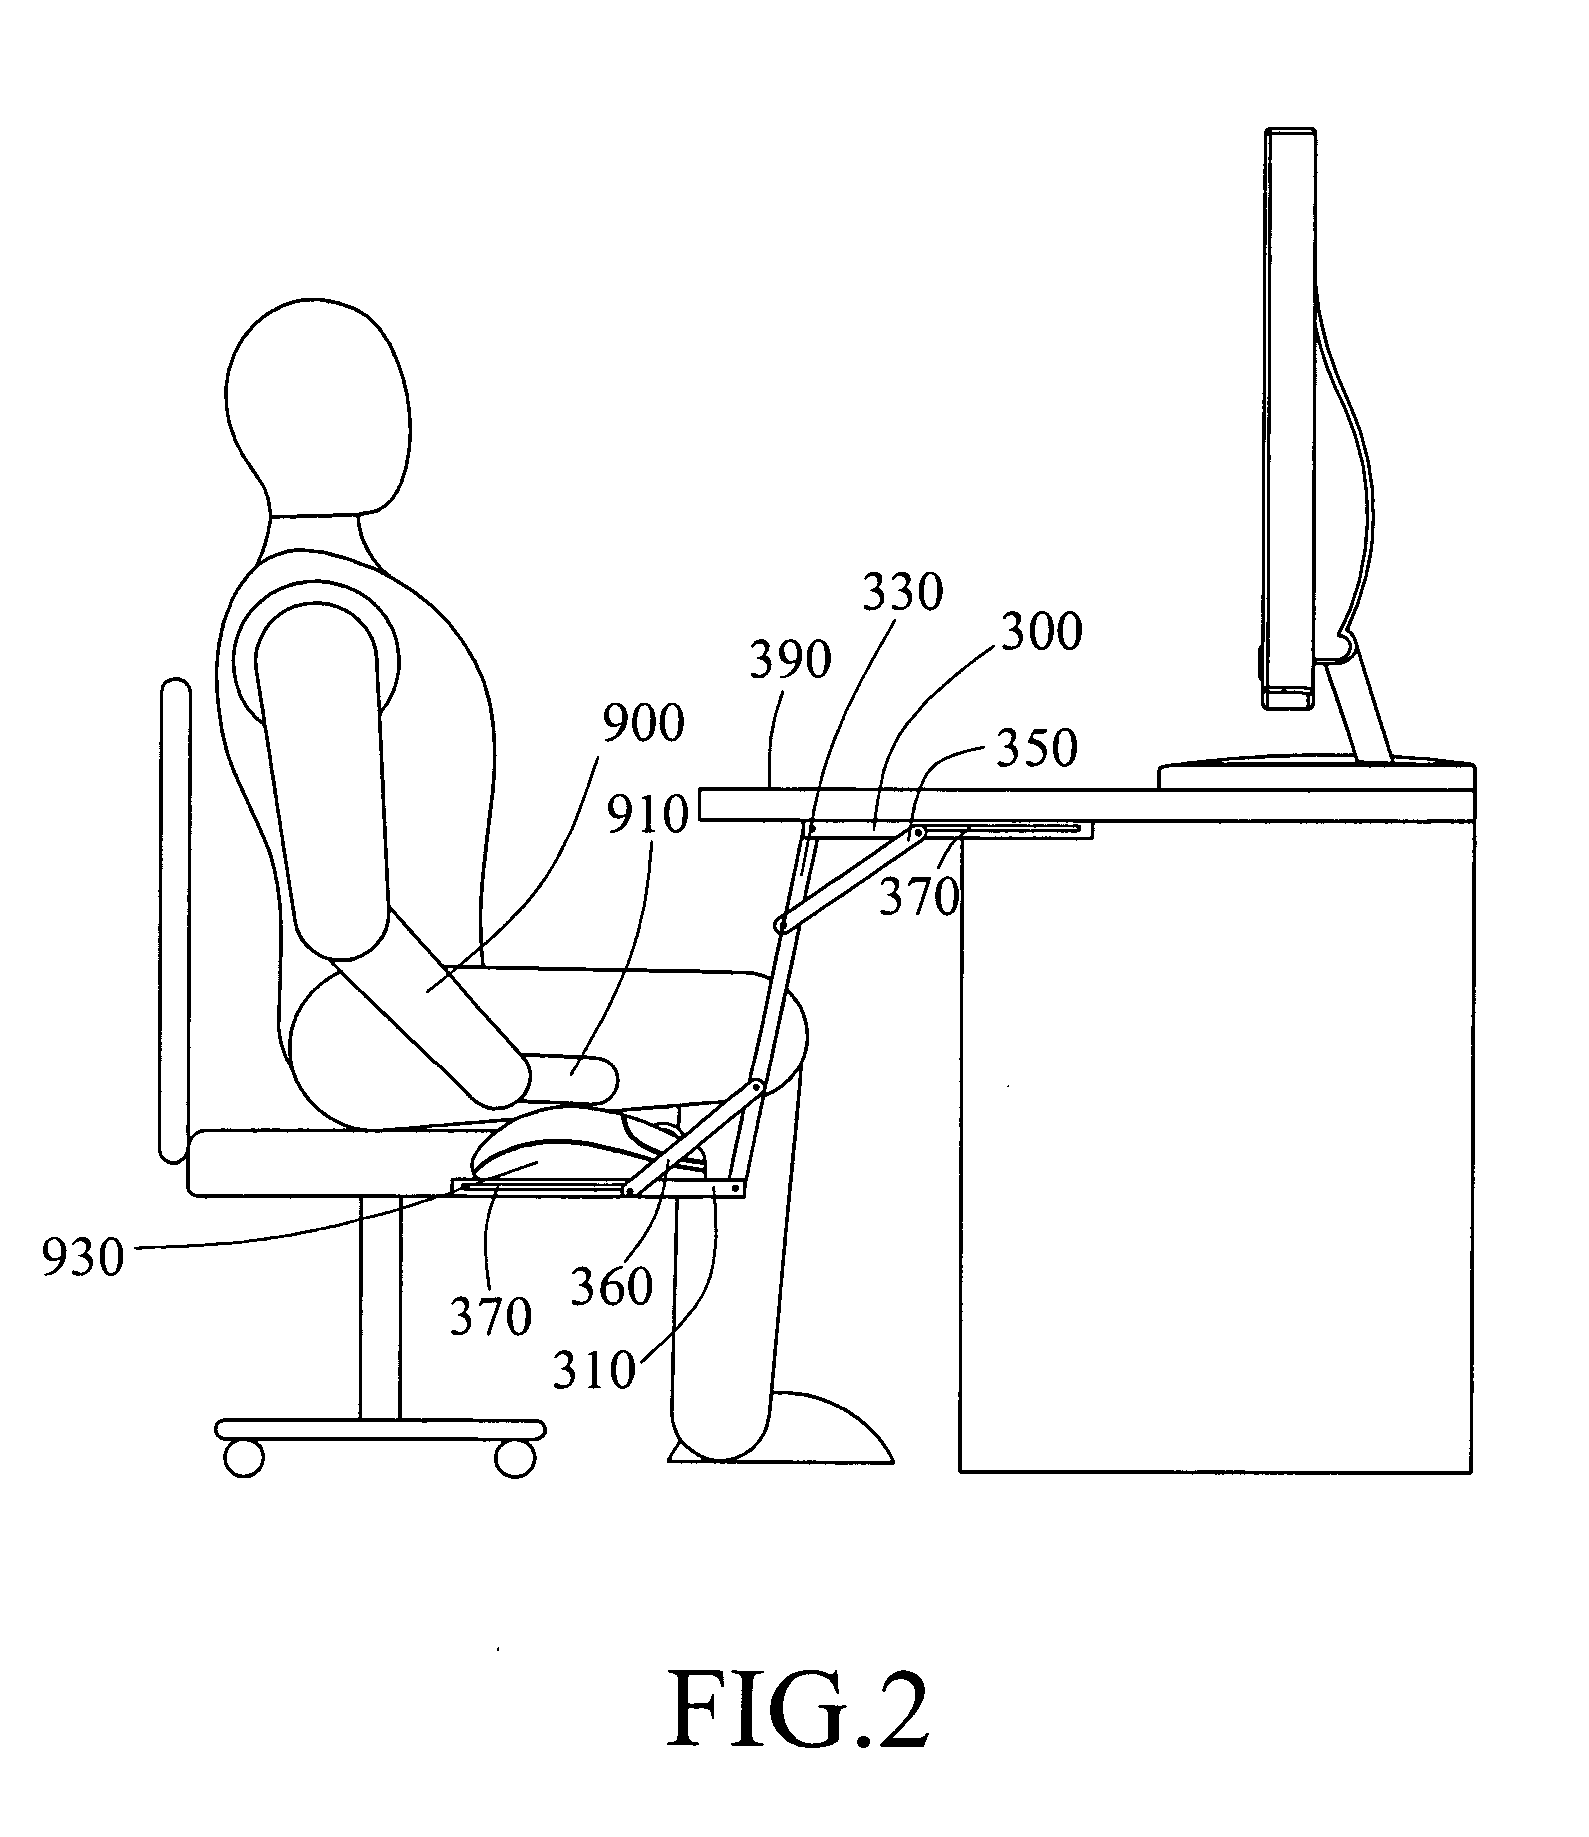 Furniture for placing electronic device